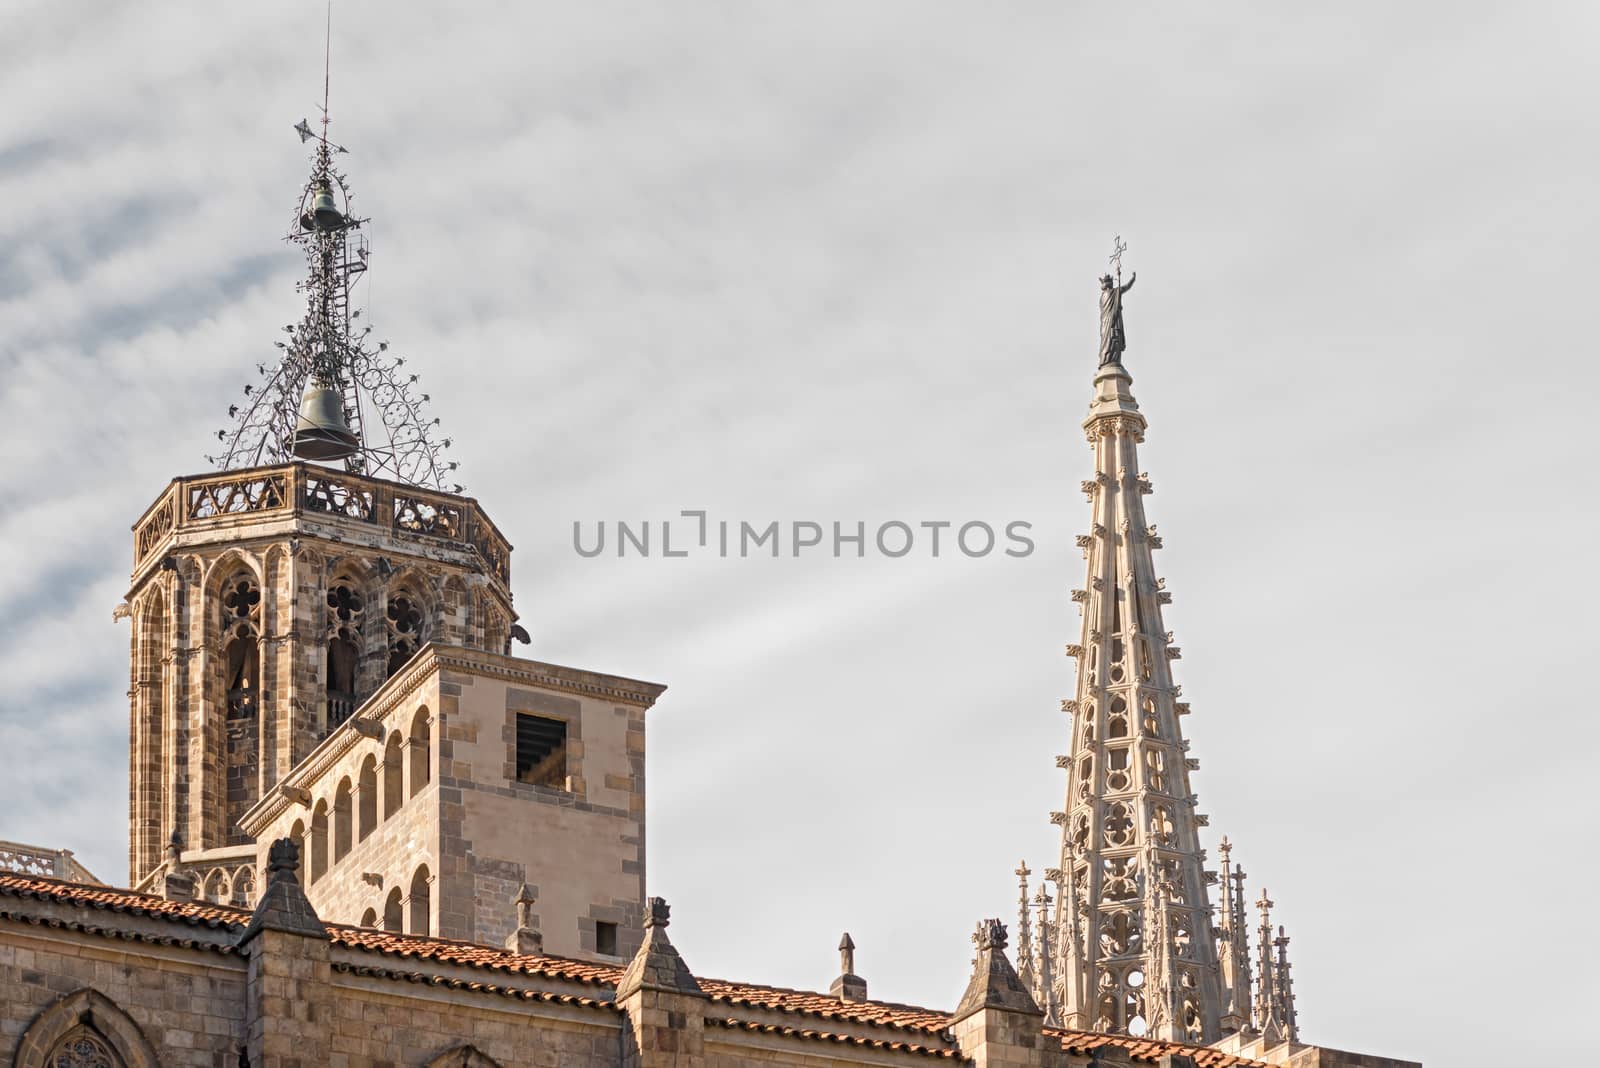 The roof of the Cathedral of the Holy Cross and Saint Eulalia. It  is the Gothic cathedral of Barcelona, and it was constructed from the 13th to 15th centuries